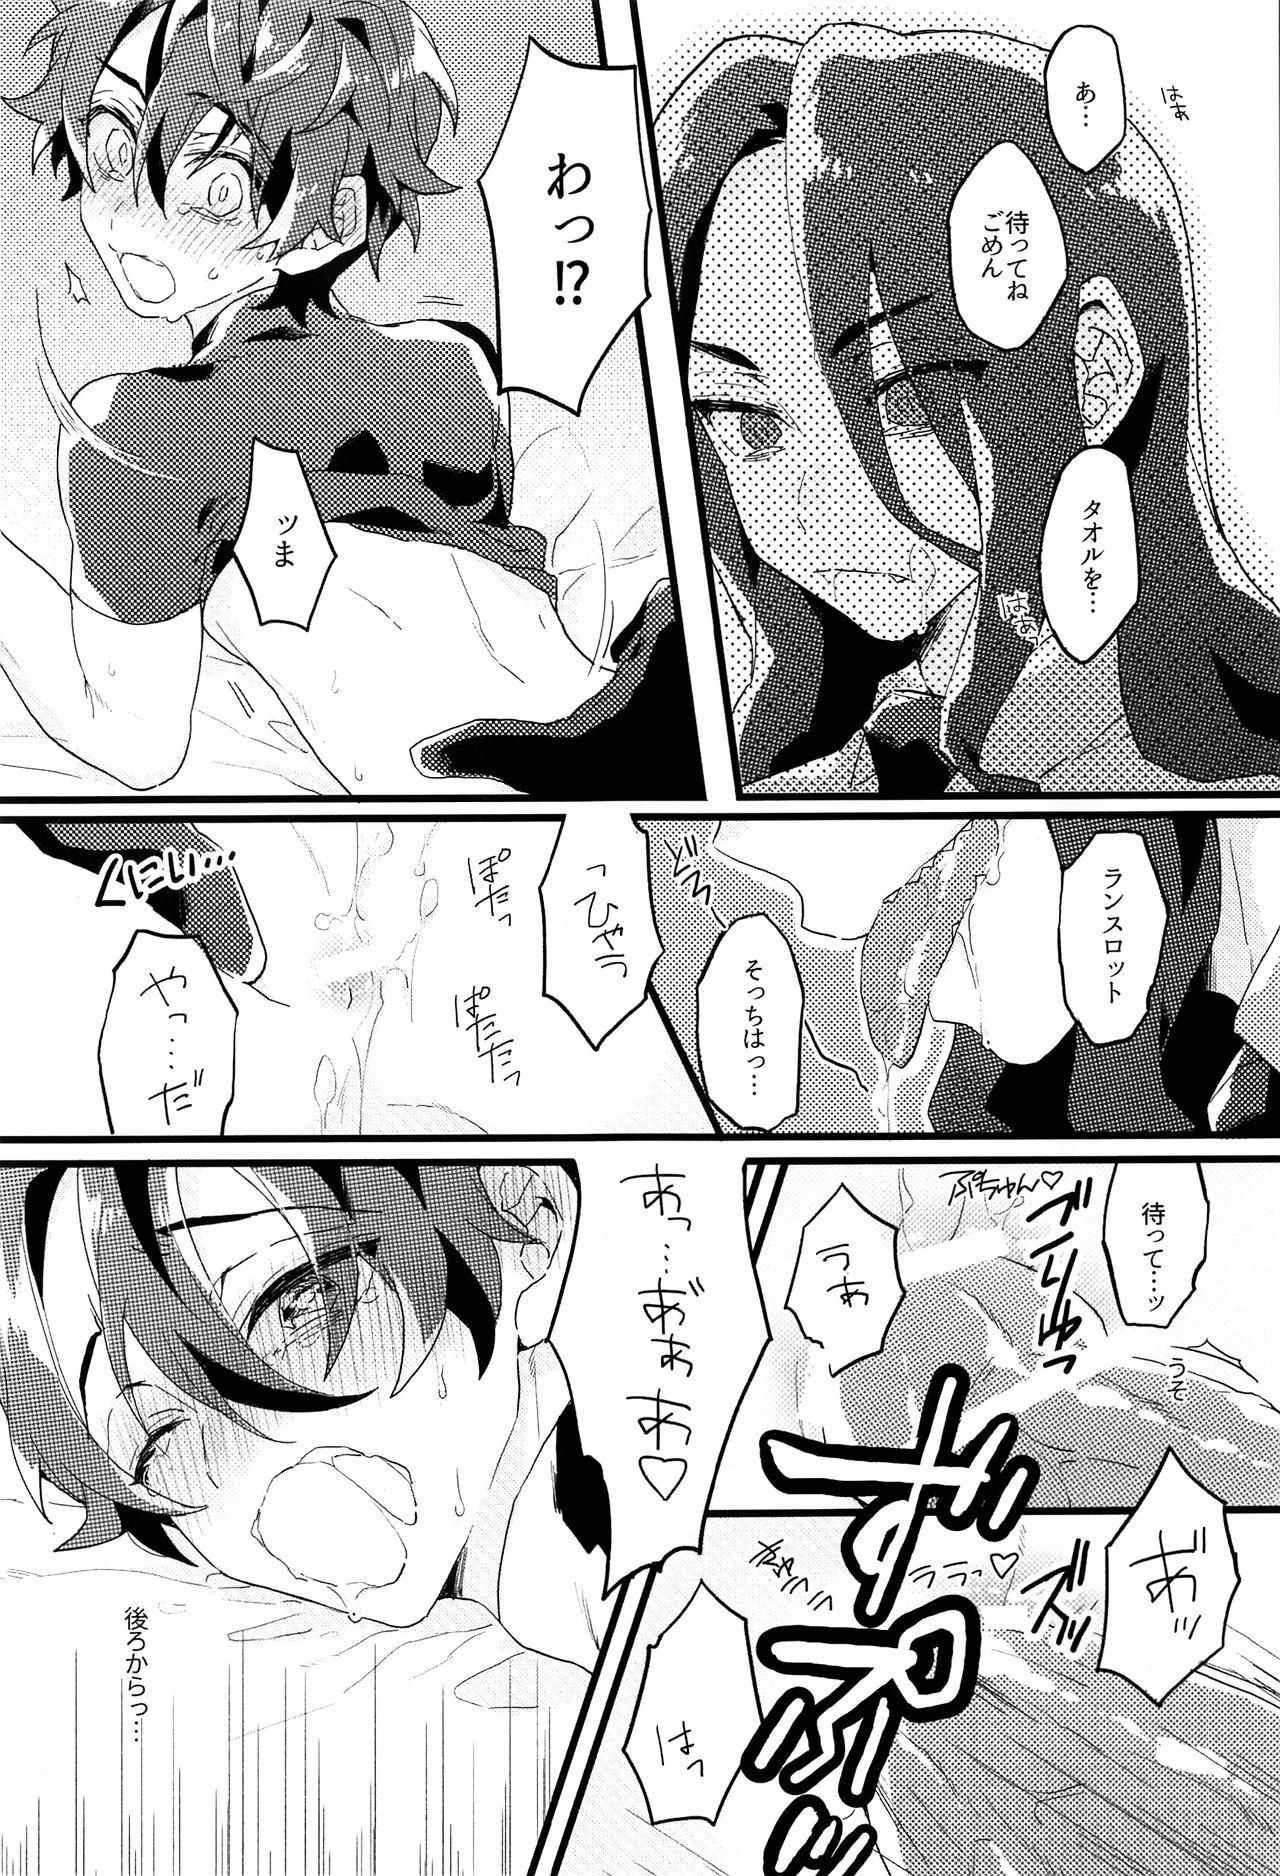 Plump hungry sharp chune - Fate grand order Van - Page 5